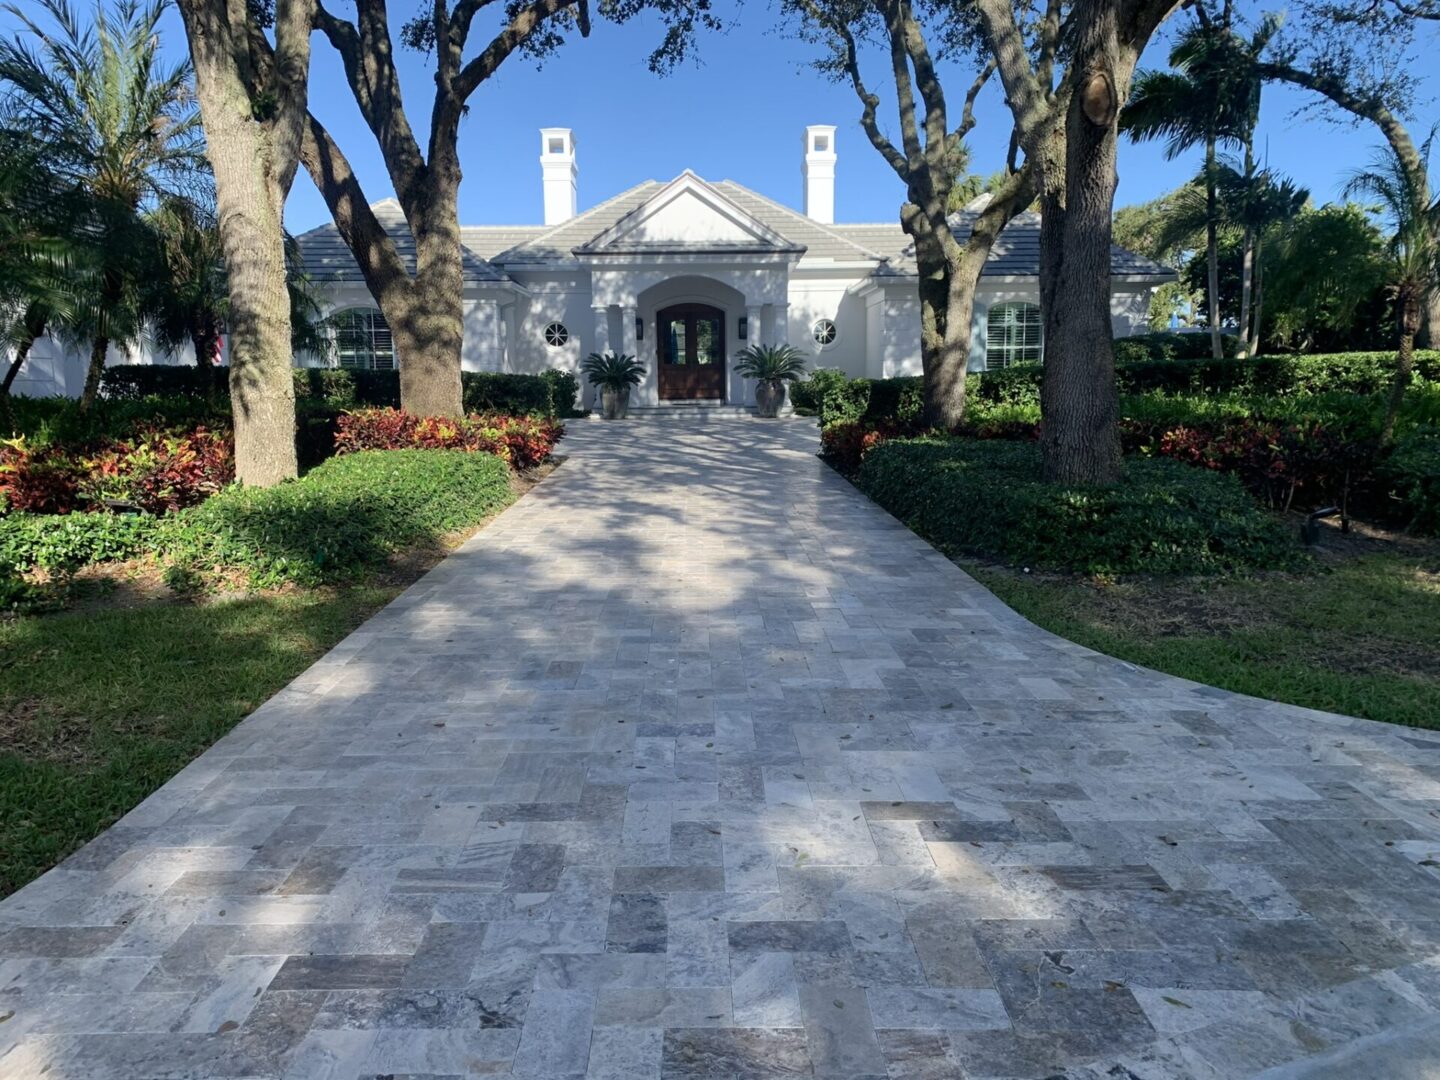 A long, stone-paved driveway leads to a grand white house surrounded by trees and lush greenery under a clear blue sky.